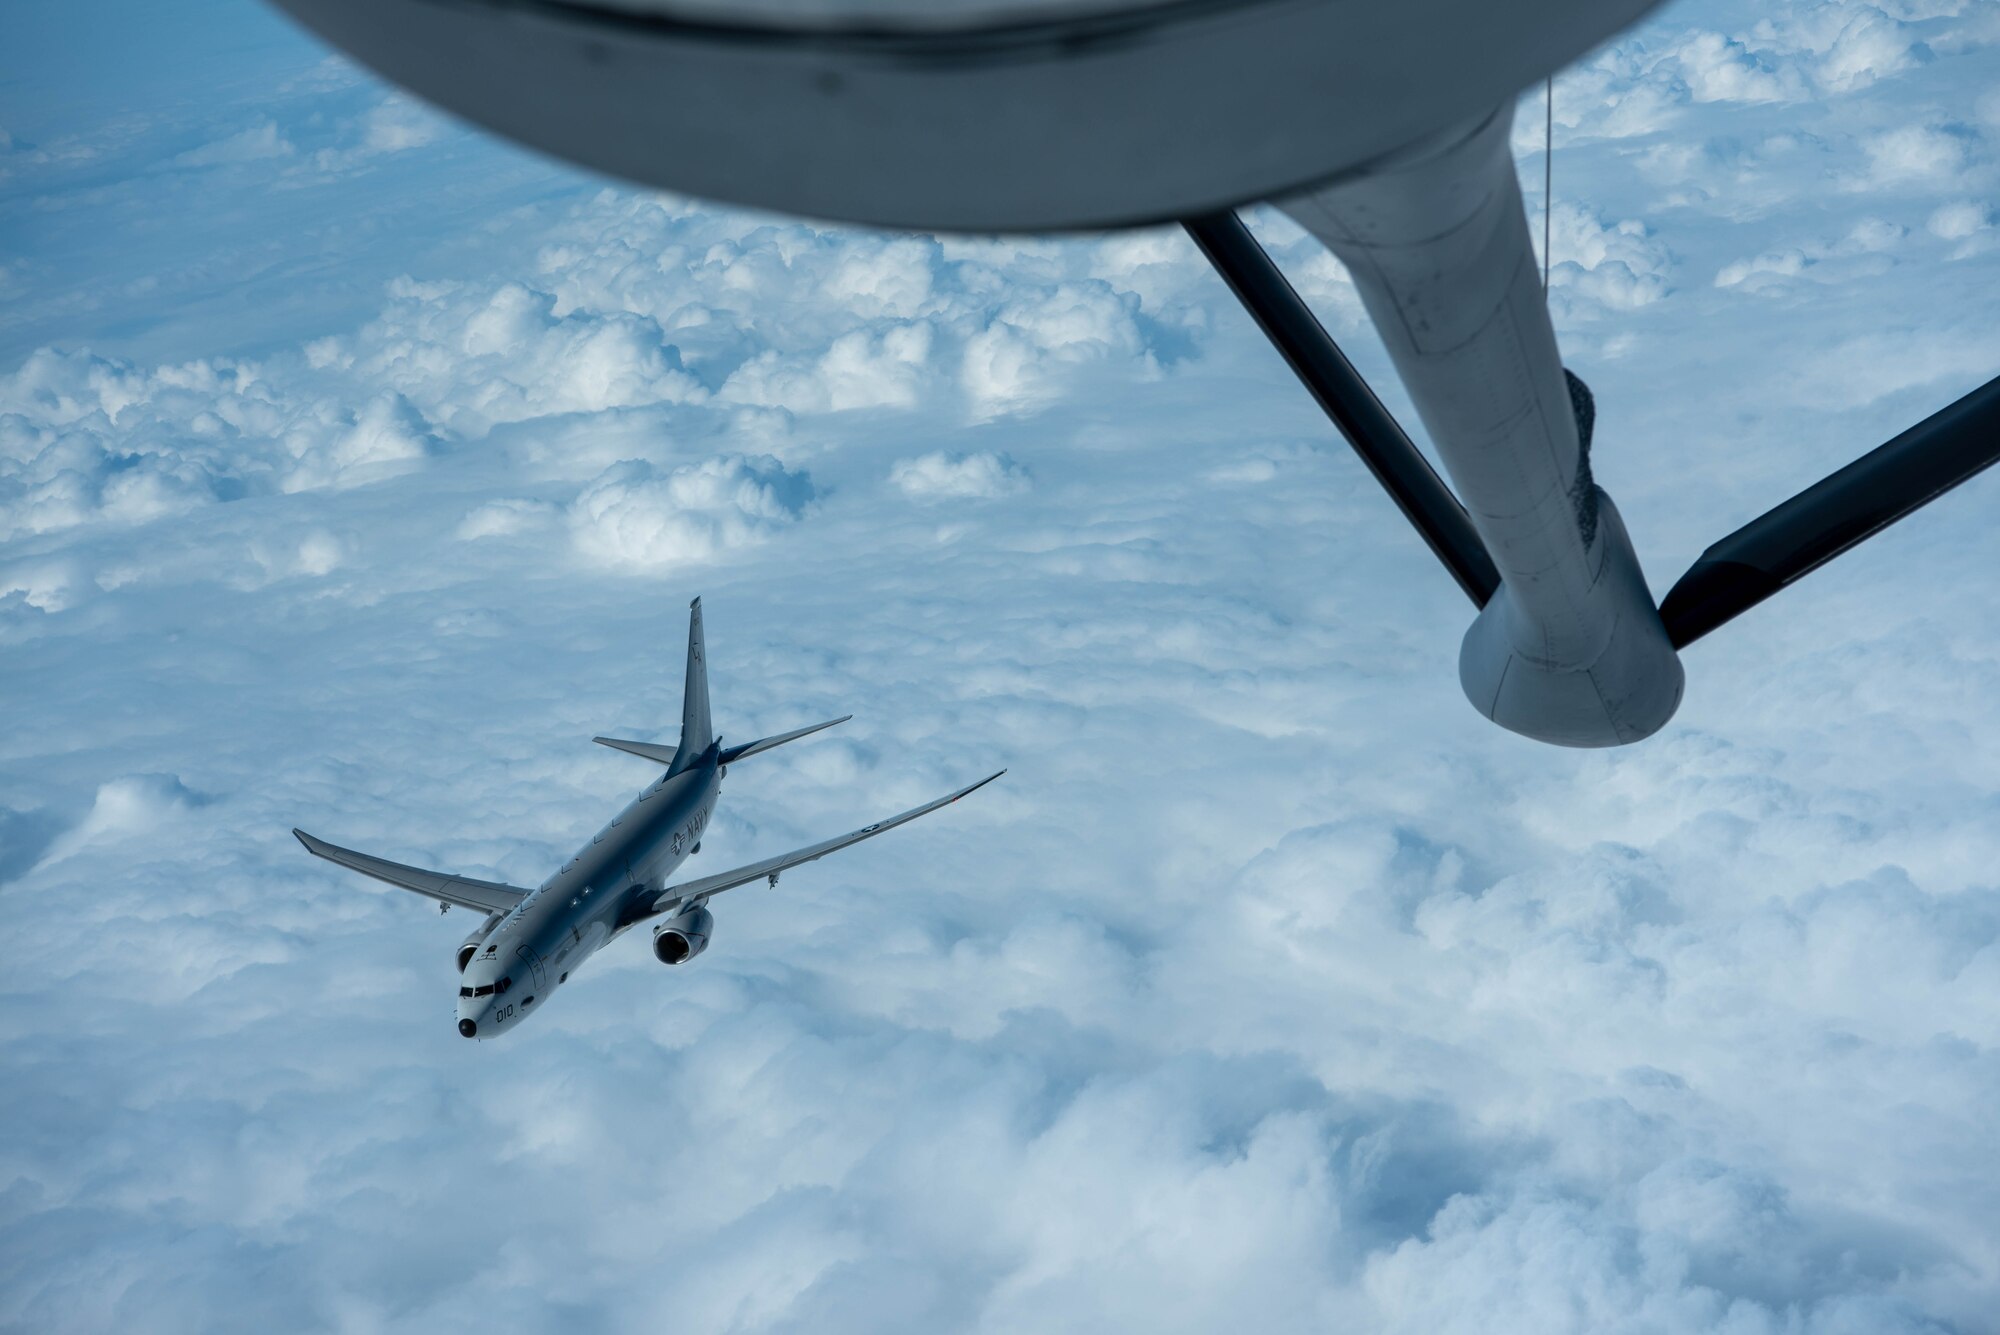 Plane flies away from a refueling plane